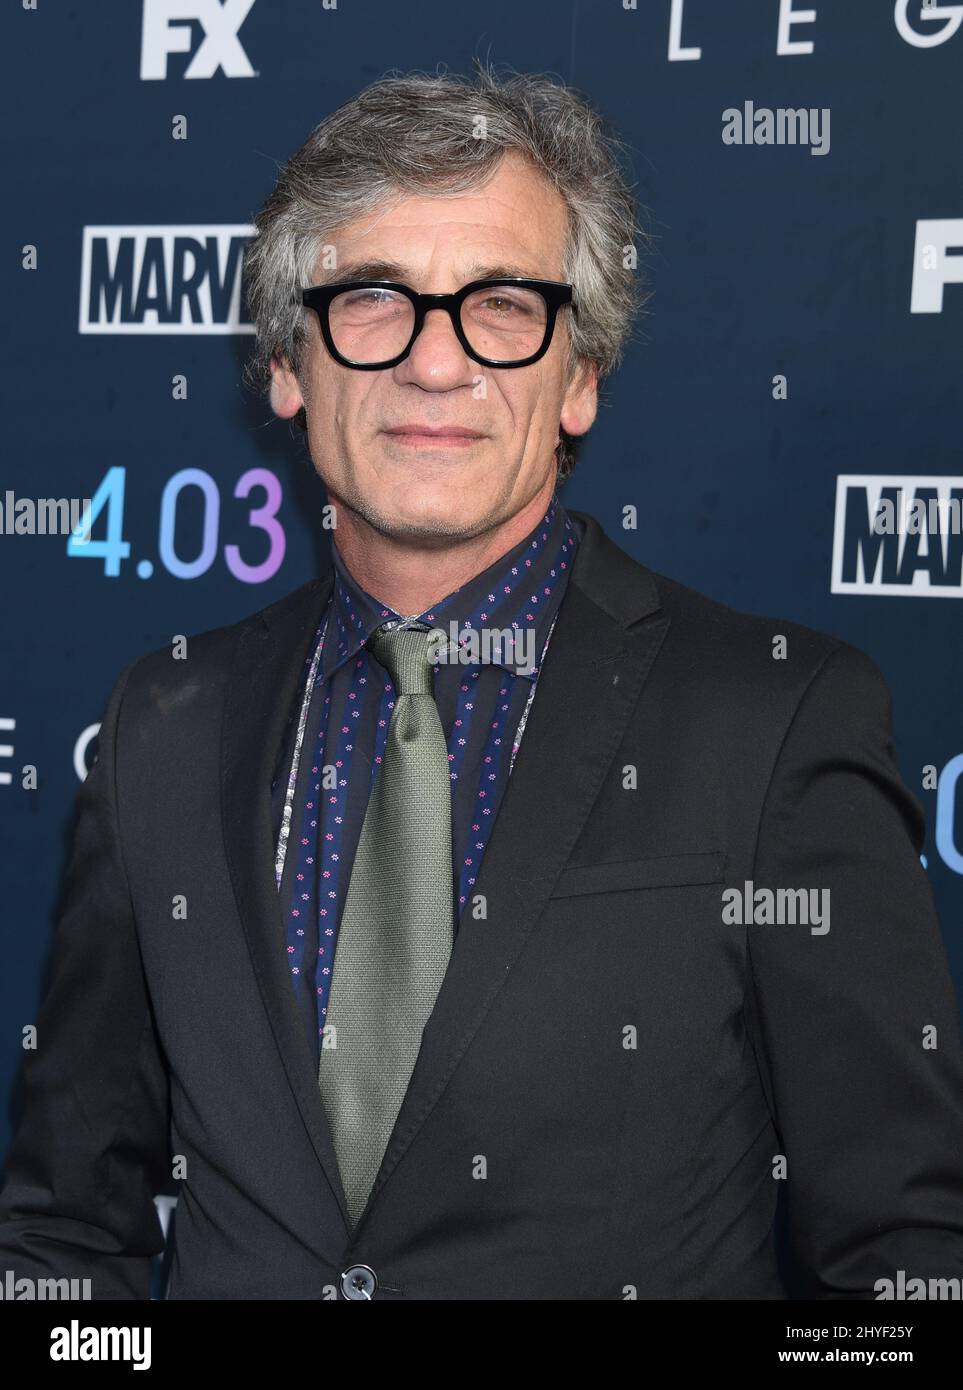 Alon Aboutboul at FX's 'Legion' Season 2 Premiere held at the Directors Guild of America on April 2, 2018 in Los Angeles, , USA. Stock Photo